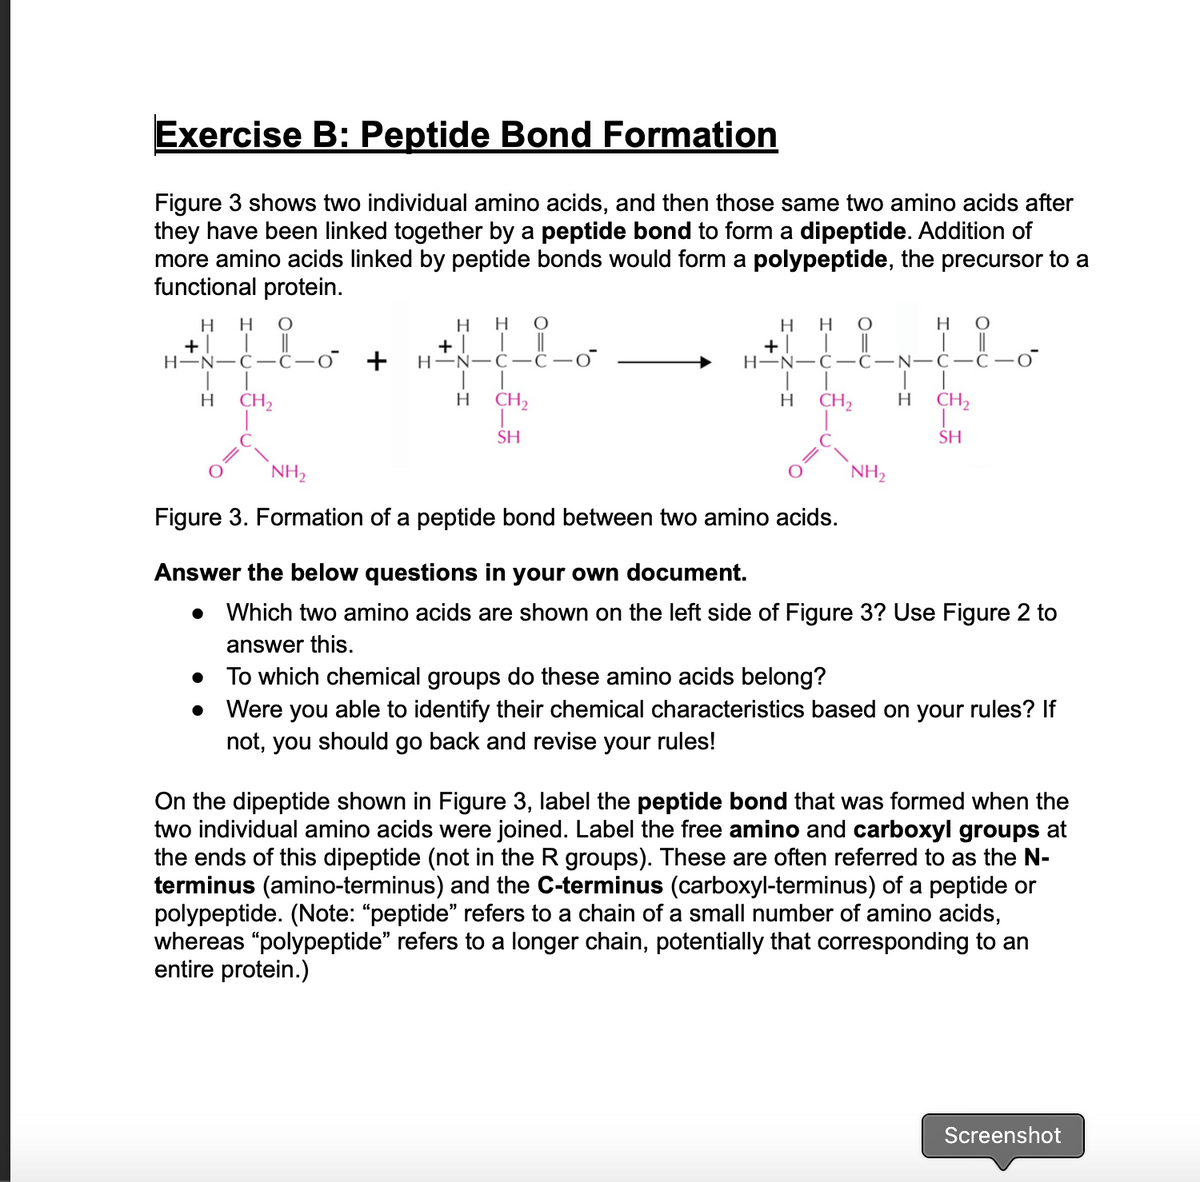 Exercise B: Peptide Bond Formation
Figure 3 shows two individual amino acids, and then those same two amino acids after
they have been linked together by a peptide bond to form a dipeptide. Addition of
more amino acids linked by peptide bonds would form a polypeptide, the precursor to a
functional protein.
нн
H
H O
нно
H O
+| | ||
H-N-C-ċ-o +
+| 1 ||
H-N-C-C
+| | ||
Н-N—С- С—N—C—С
H
CH2
H
CH2
H
CH2
CH2
SH
SH
NH2
NH2
Figure 3. Formation of a peptide bond between two amino acids.
Answer the below questions in your own document.
• Which two amino acids are shown on the left side of Figure 3? Use Figure 2 to
answer this.
• To which chemical groups do these amino acids belong?
Were you able to identify their chemical characteristics based on your rules? If
not, you should go back and revise your rules!
On the dipeptide shown in Figure 3, label the peptide bond that was formed when the
two individual amino acids were joined. Label the free amino and carboxyl groups at
the ends of this dipeptide (not in the R groups). These are often referred to as the N-
terminus (amino-terminus) and the C-terminus (carboxyl-terminus) of a peptide or
polypeptide. (Note: "peptide" refers to a chain of a small number of amino acids,
whereas "polypeptide" refers to a longer chain, potentially that corresponding to an
entire protein.)
Screenshot
